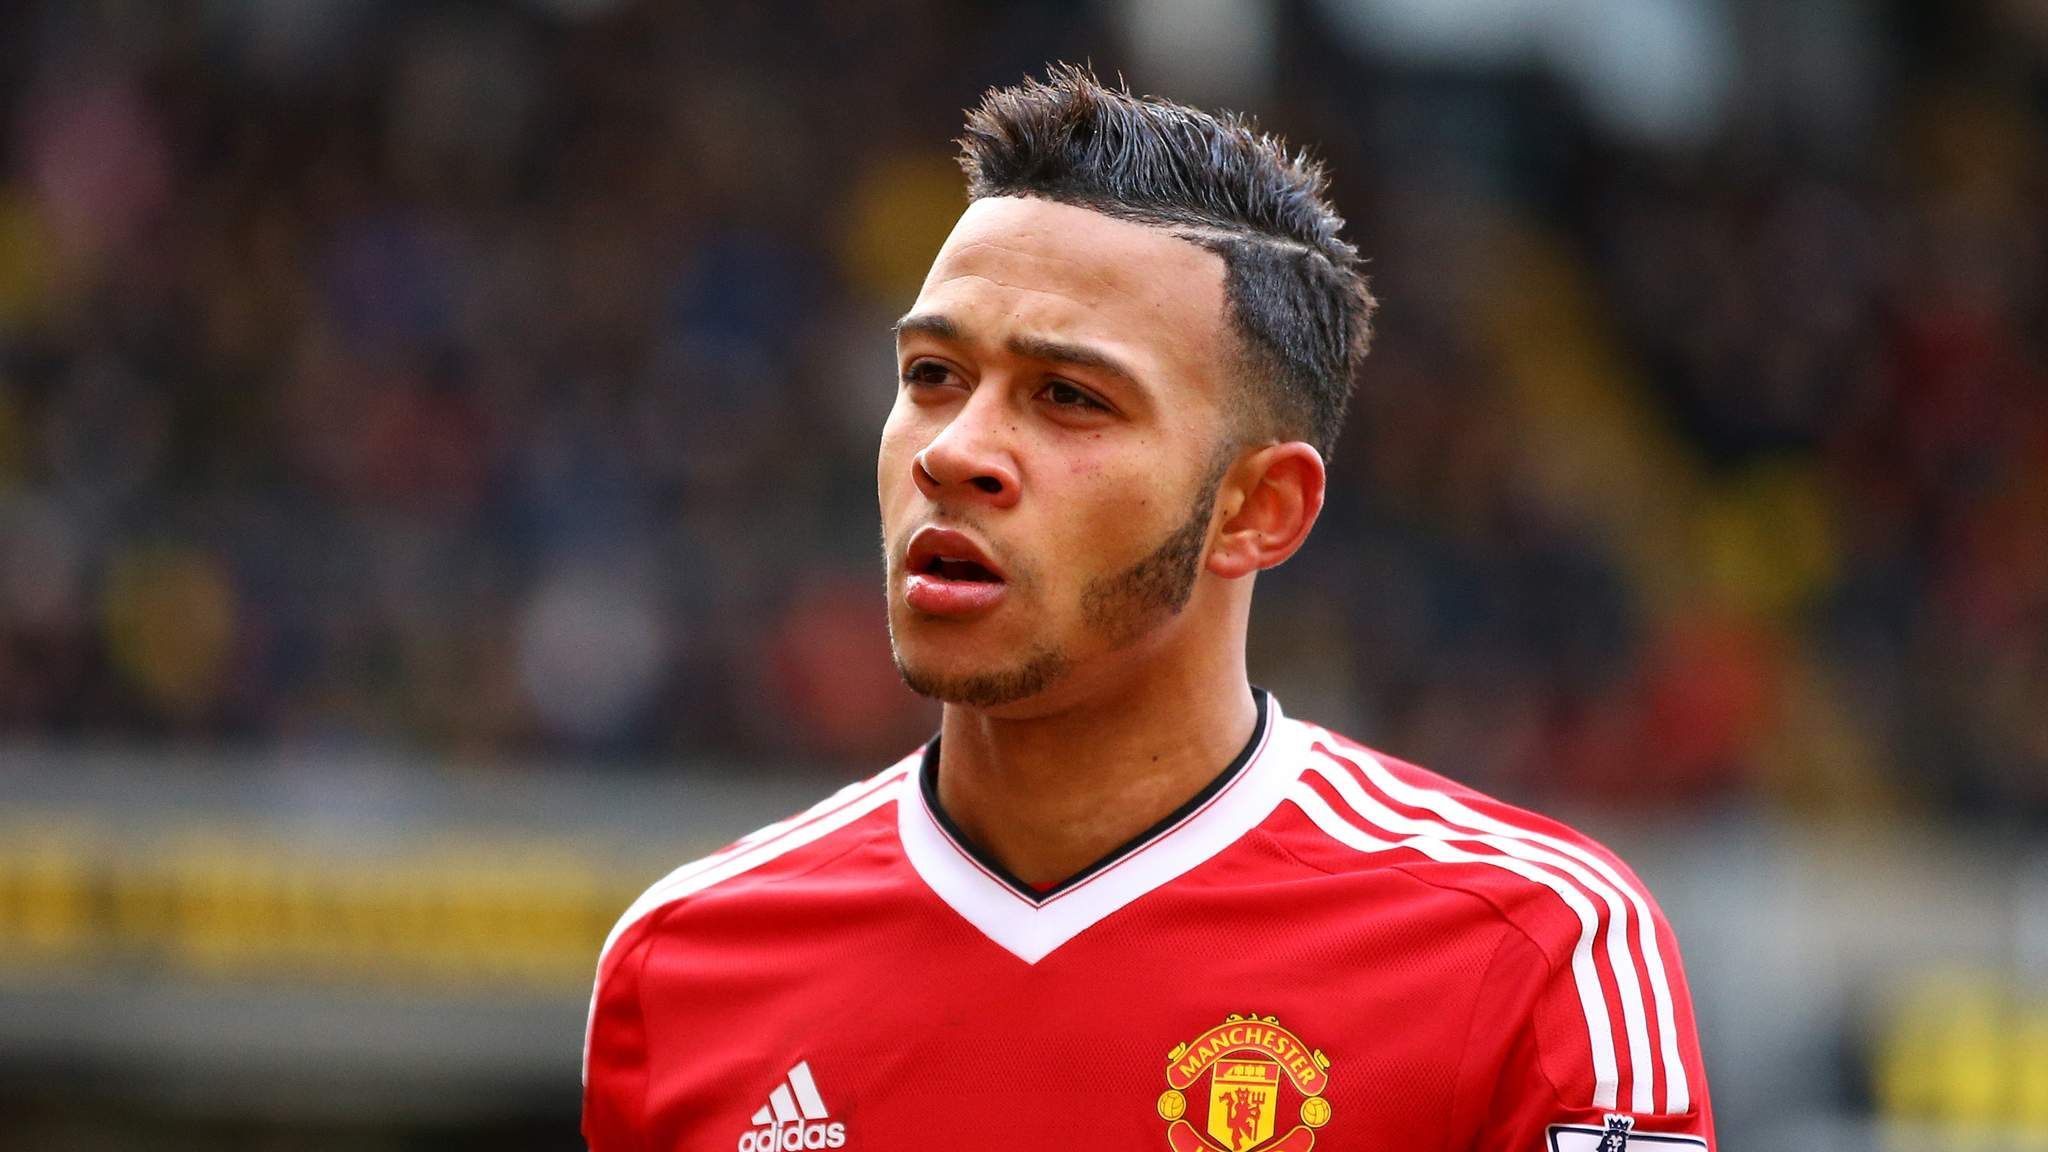 Memphis Depay delighted with Ryan Giggs guidance after Man Utd's